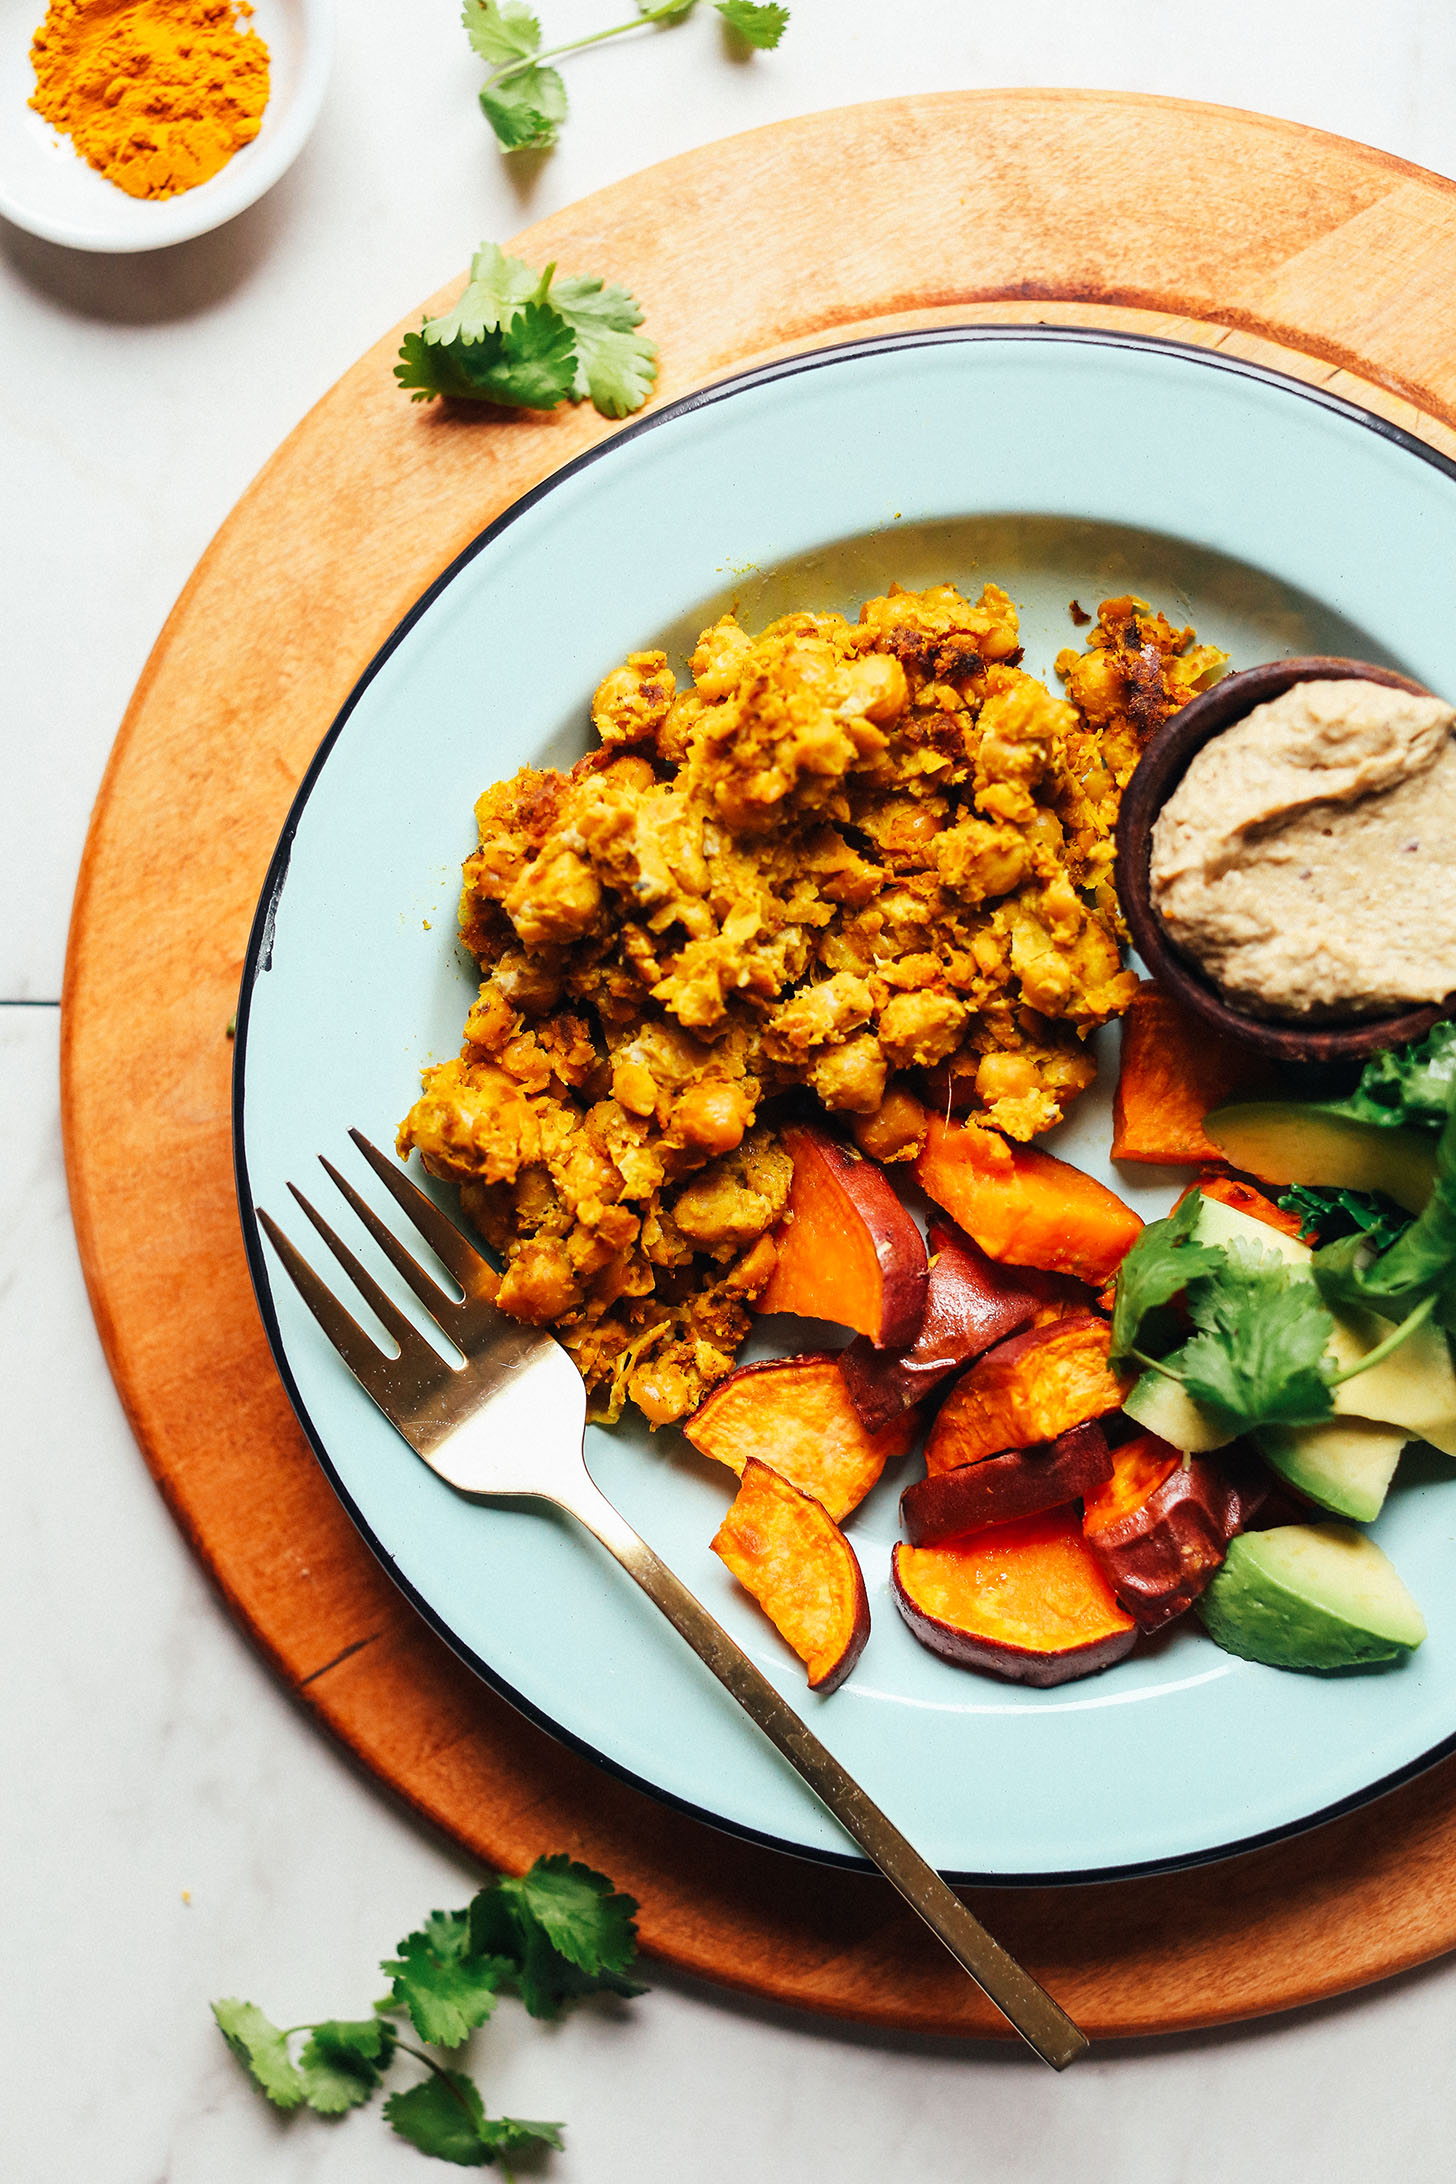 Plate with Chickpea Scramble and goodies for a healthy plant-based meal